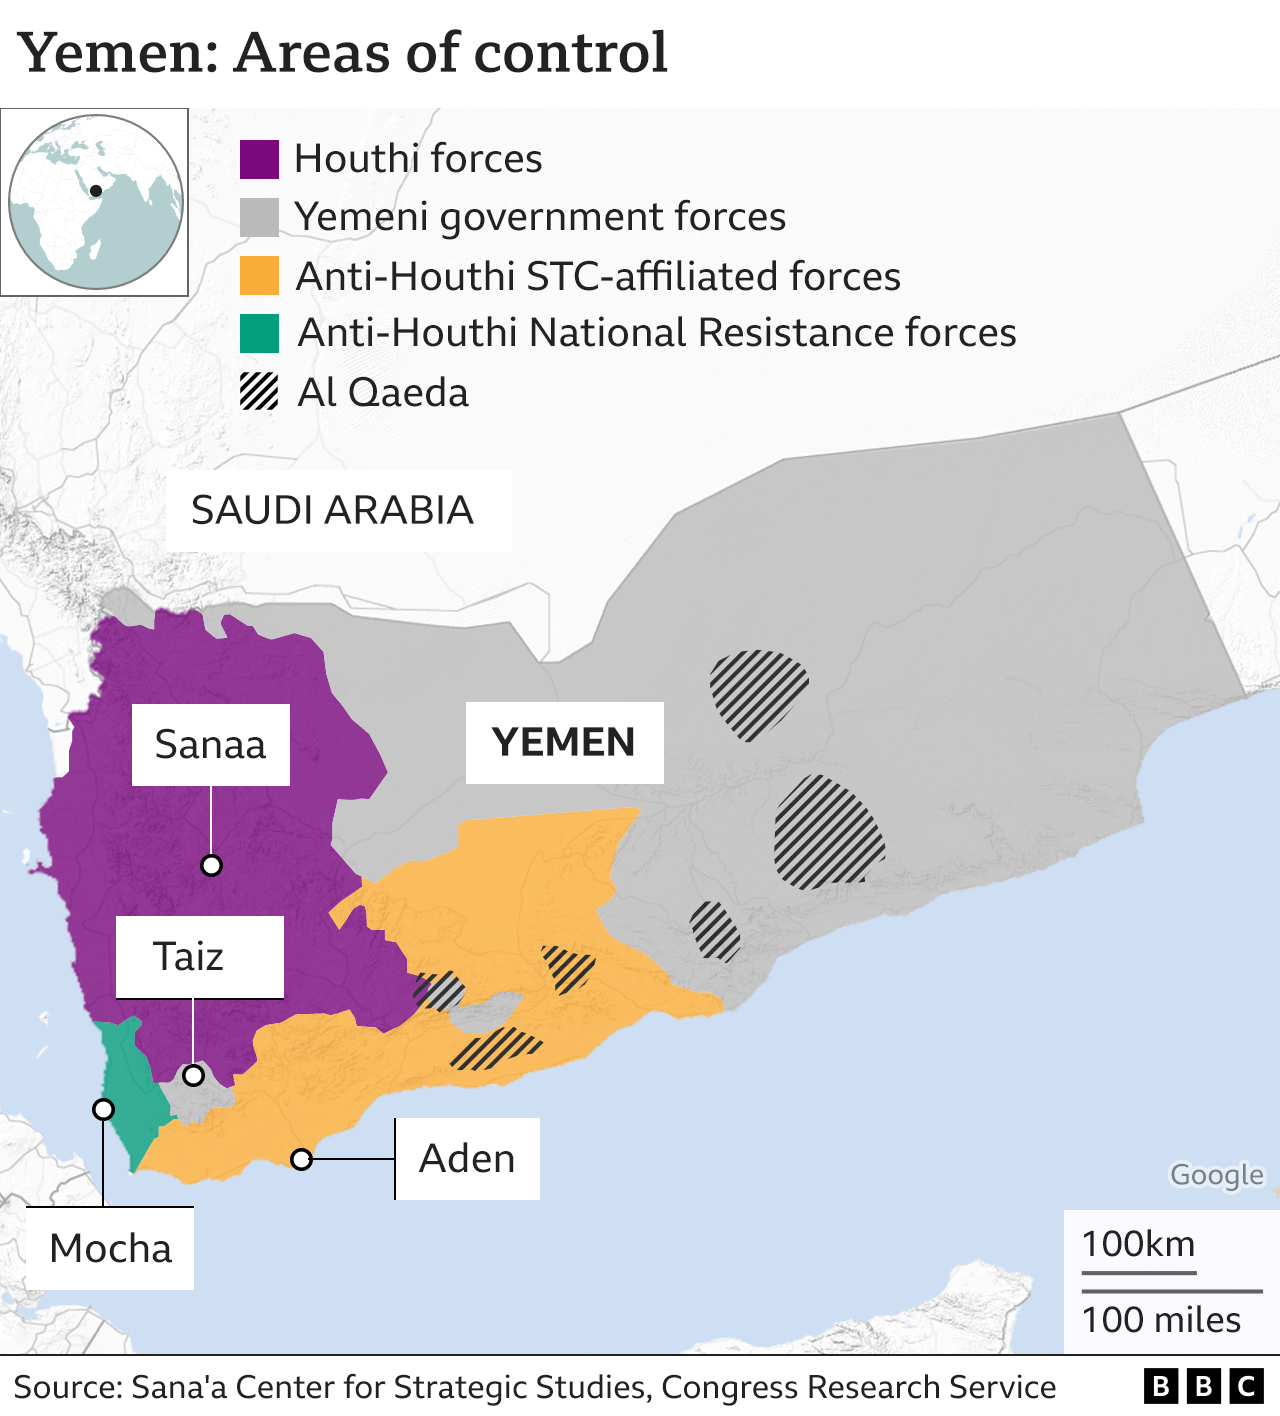 Map showing areas of control in Yemen